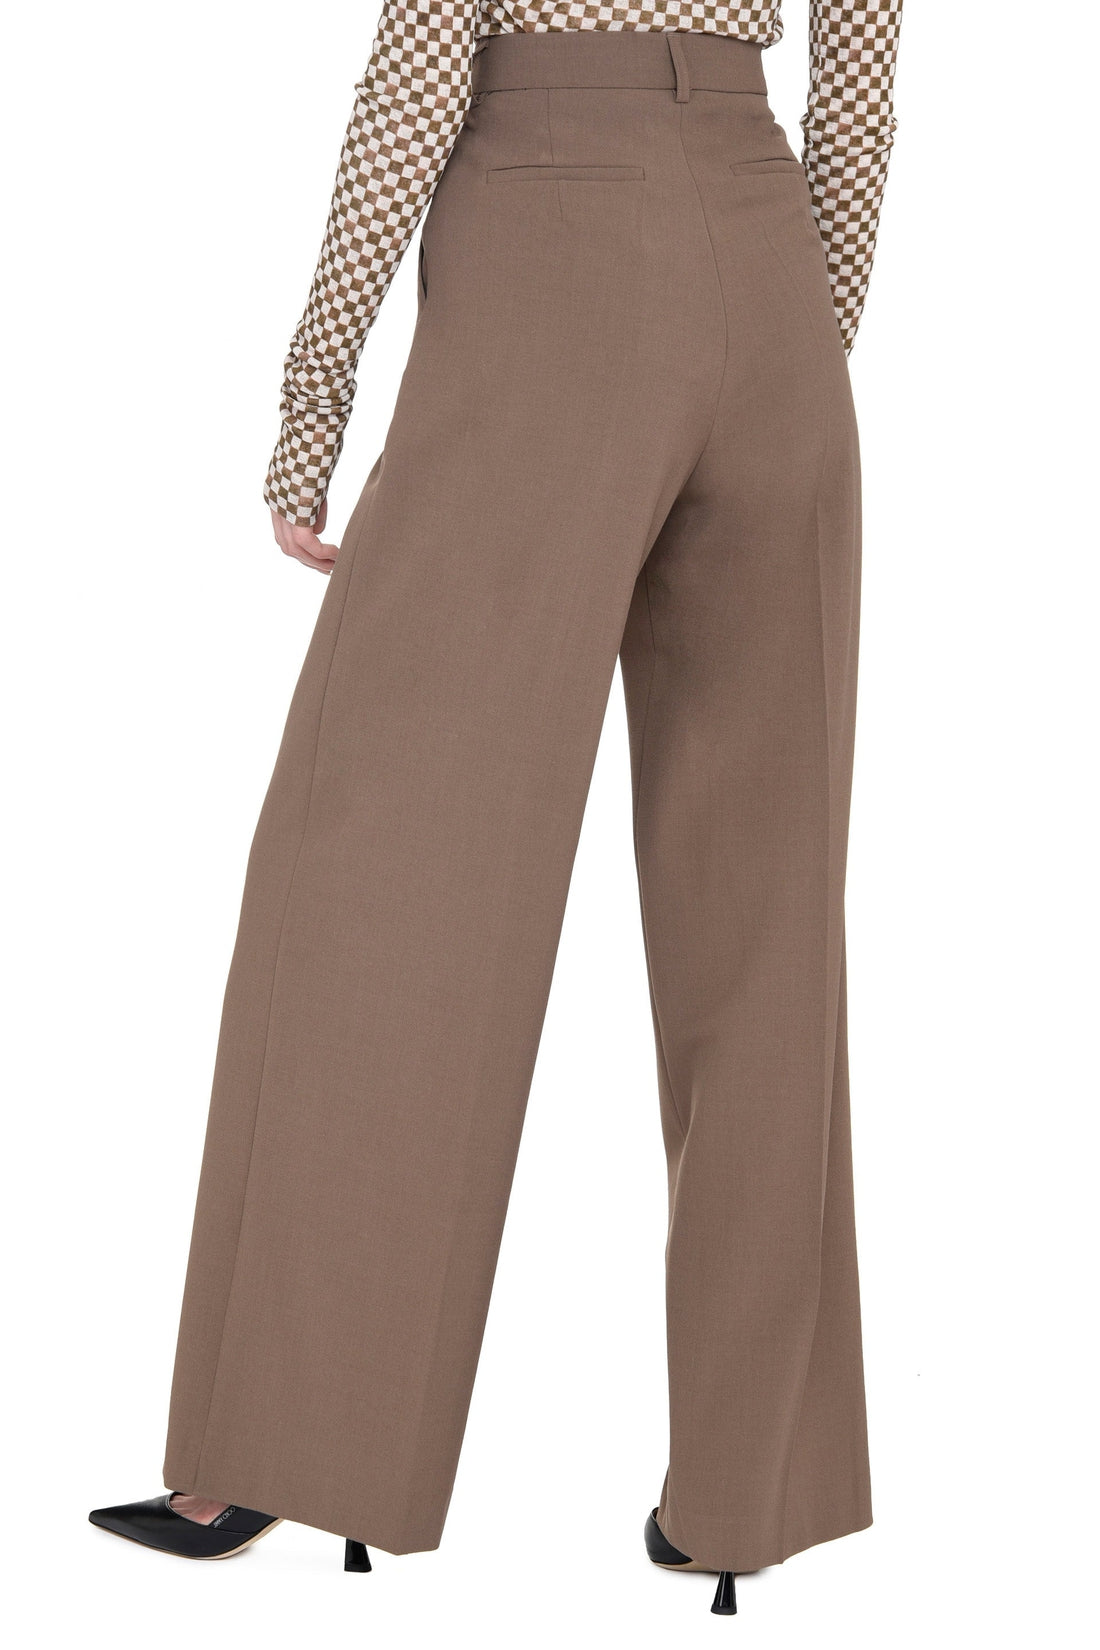 Nanushka-OUTLET-SALE-Cleo tailored wide-leg trousers-ARCHIVIST